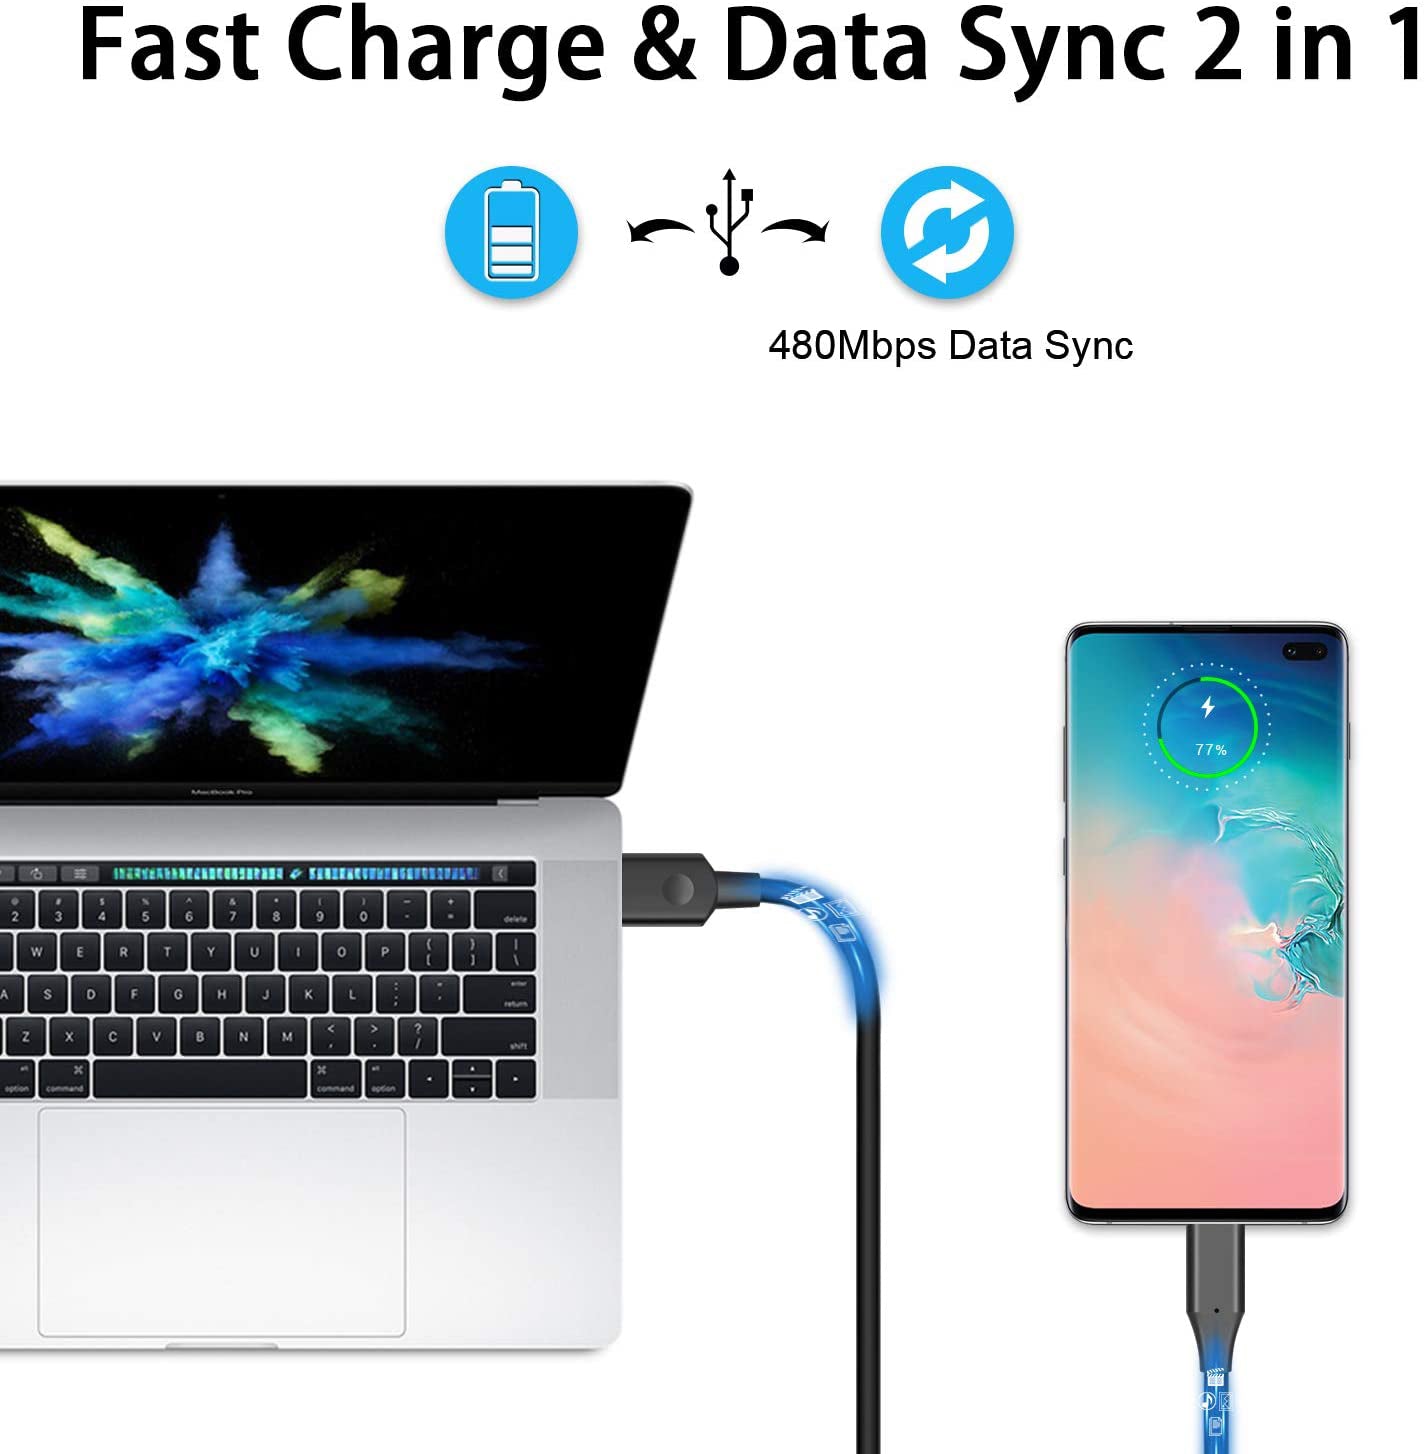 6ft and 10ft Long USB-C Cables Fast Charge TYPE-C Cord Power Wire Data Sync High Speed - ONY73